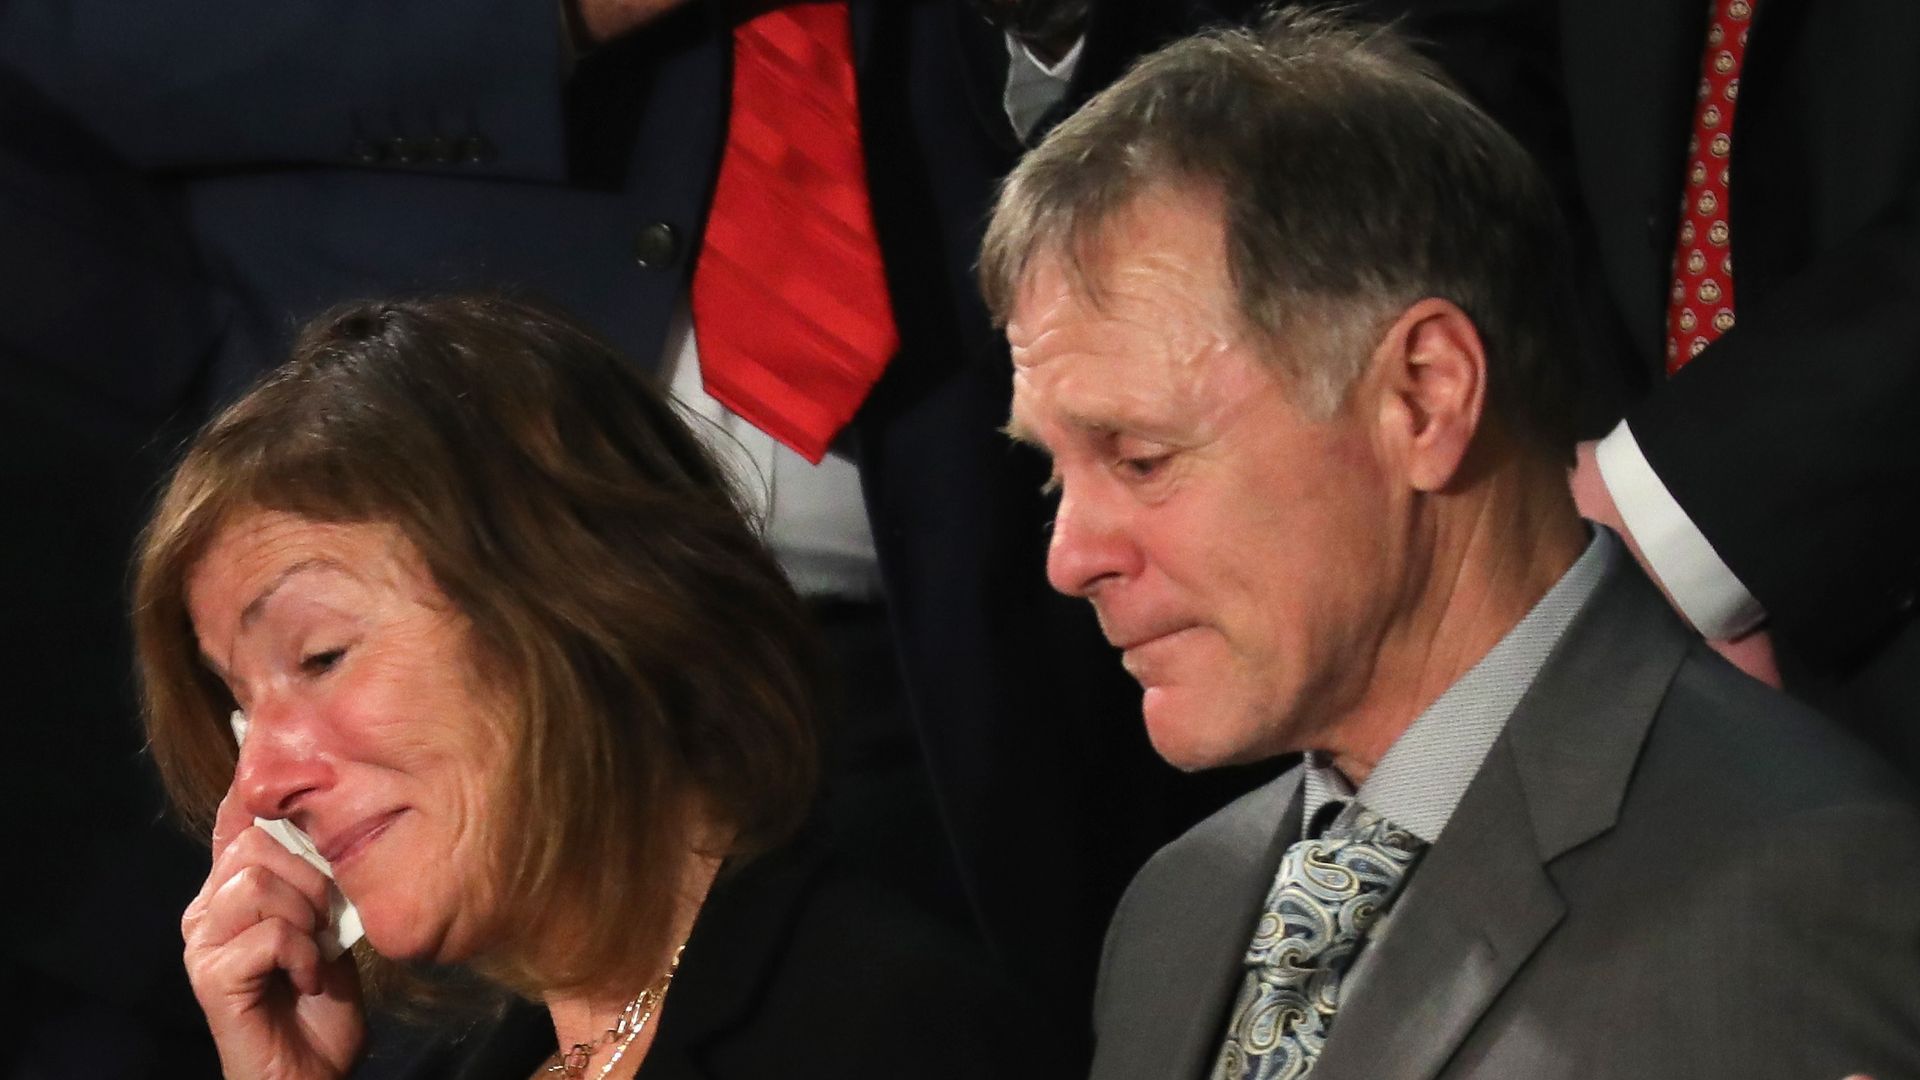 Parents of Otto Warmbier, Fred and Cindy Warmbier are acknowledged during the State of the Union address in the chamber of the U.S. House of Representatives January 30, 2018 in Washington, DC. 